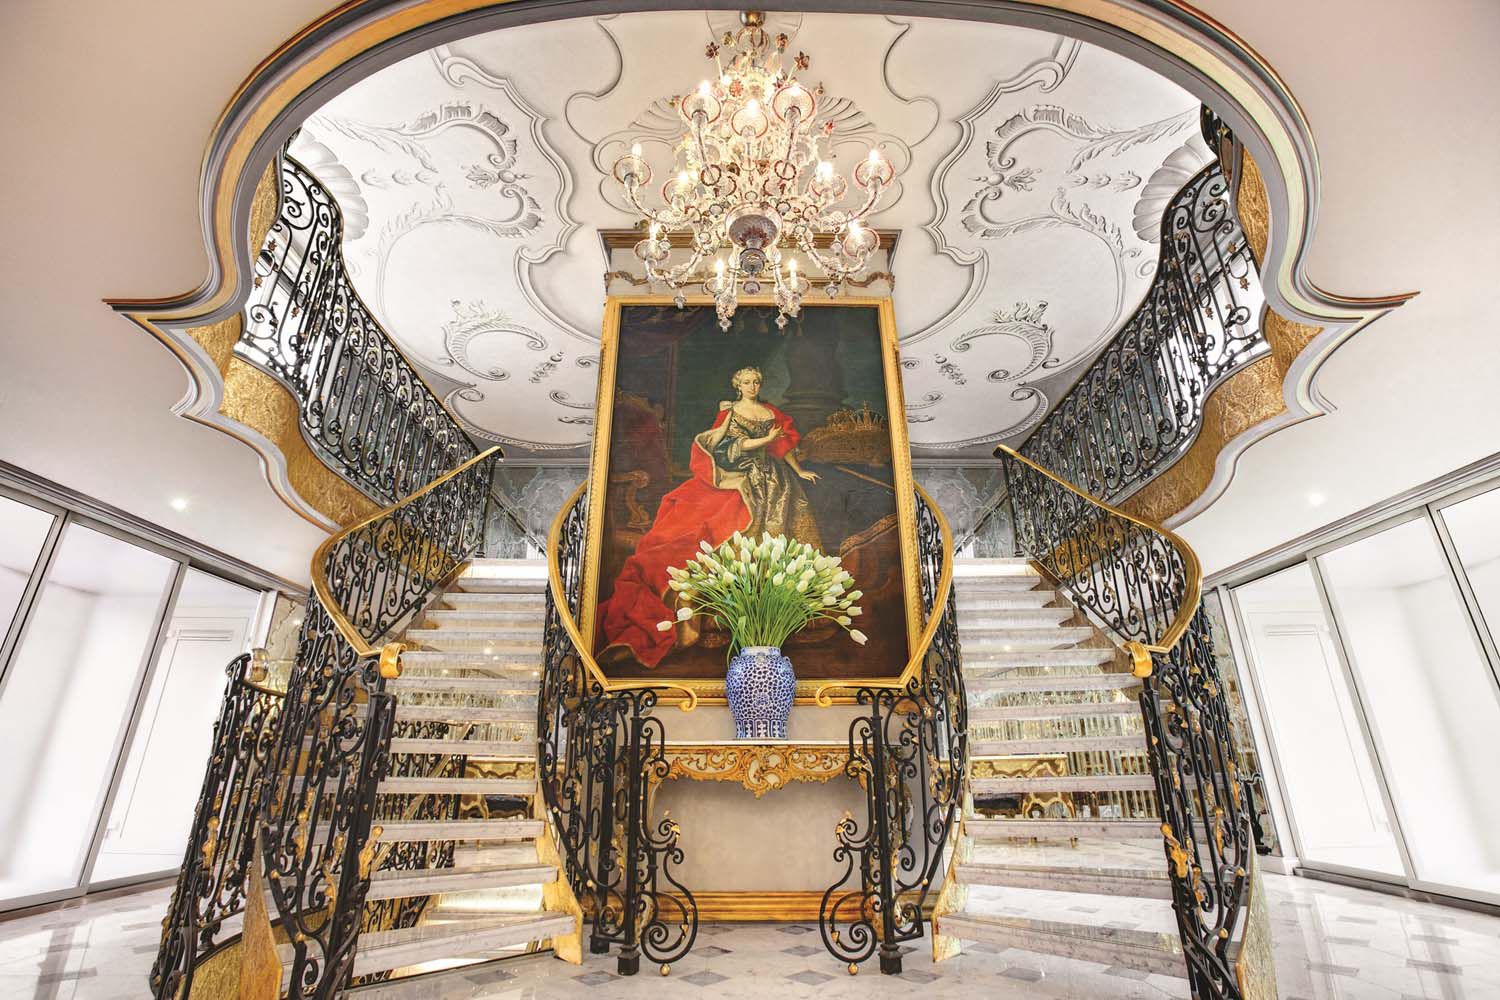 <p>Described by Cruise Critic as regal in its 18th century décor, this homage to the former Austrian empress resembles a <a href="https://www.uniworld.com/en/ships/ss-maria-theresa/">floating palace</a>. All accommodations include made-to-order Savoir of England beds, Egyptian cotton sheets, and marble-lined bathrooms. There's also a Viennese café and an enclosed, heated pool. </p>